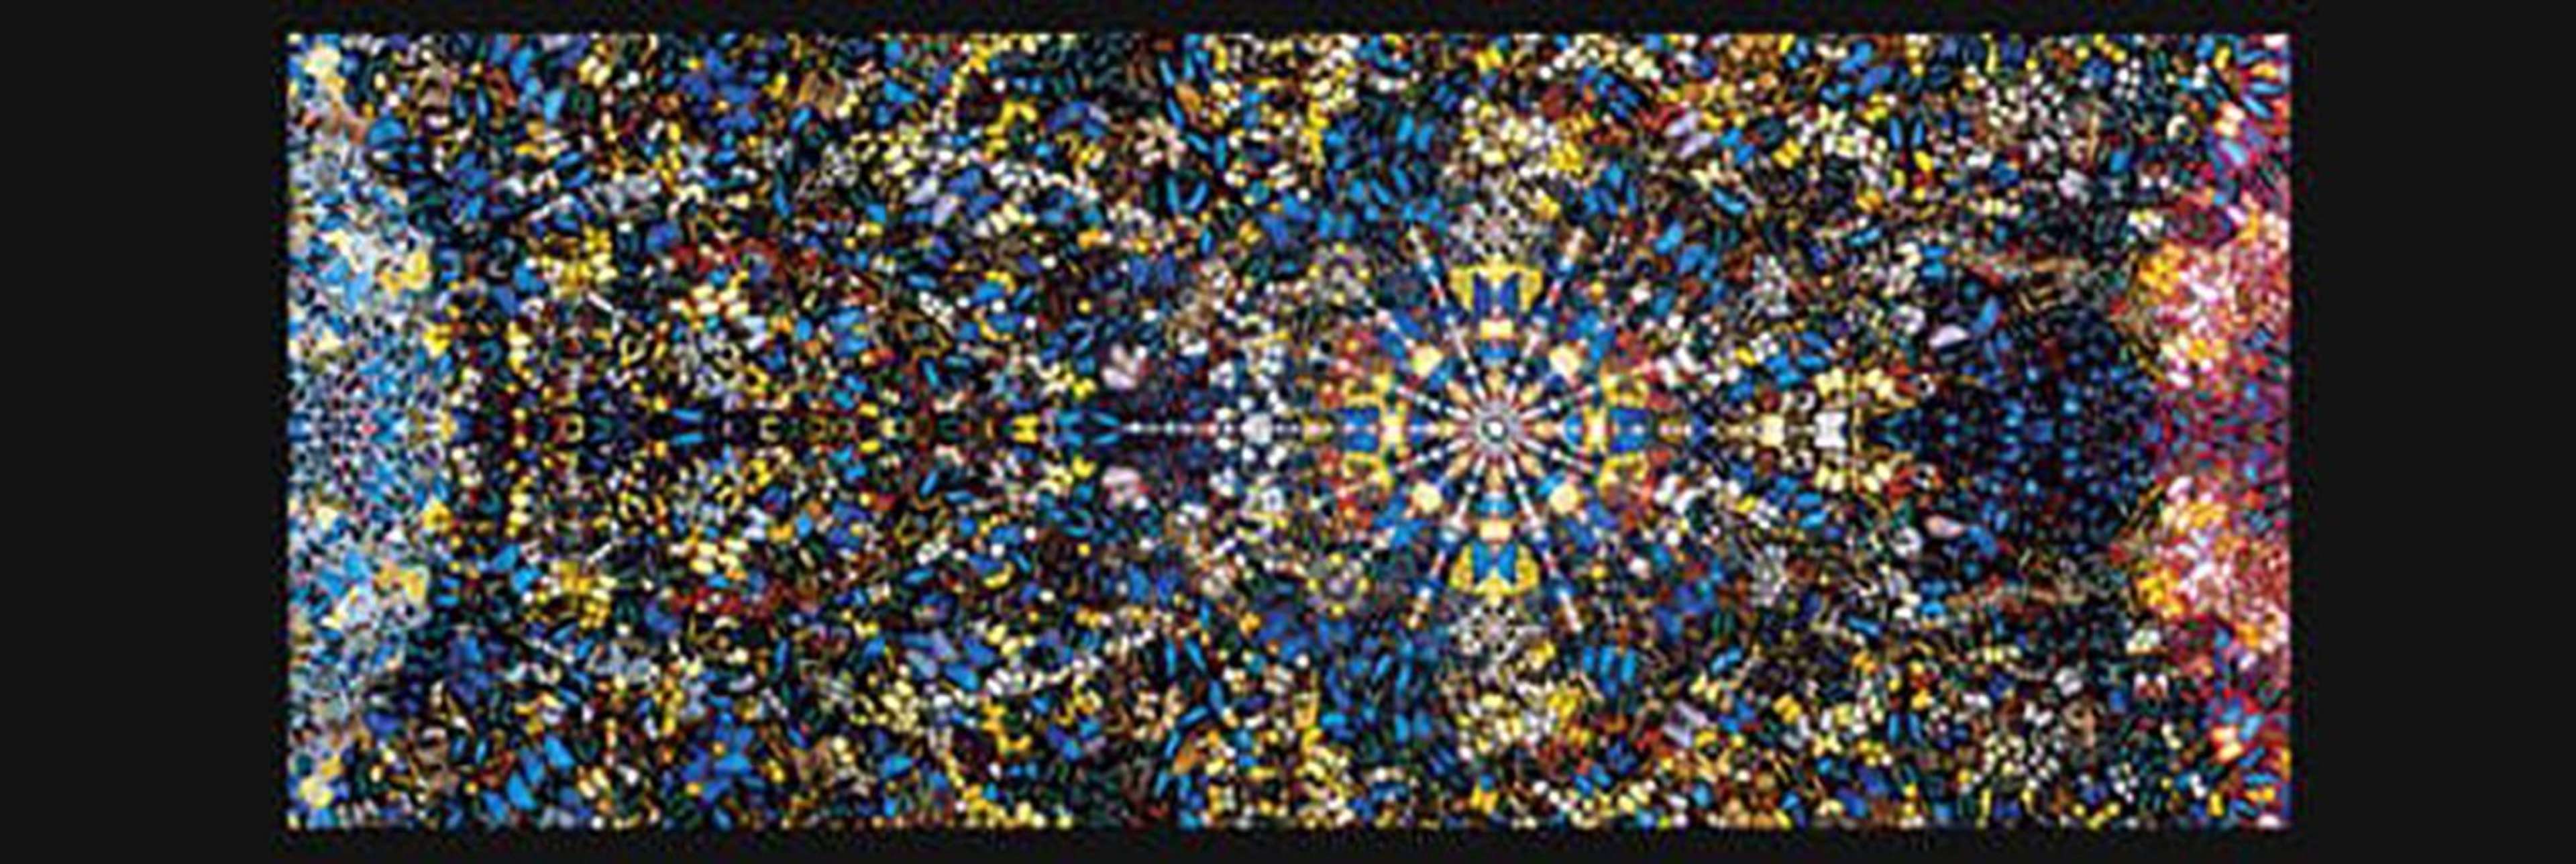 Eternity by Damien Hirst